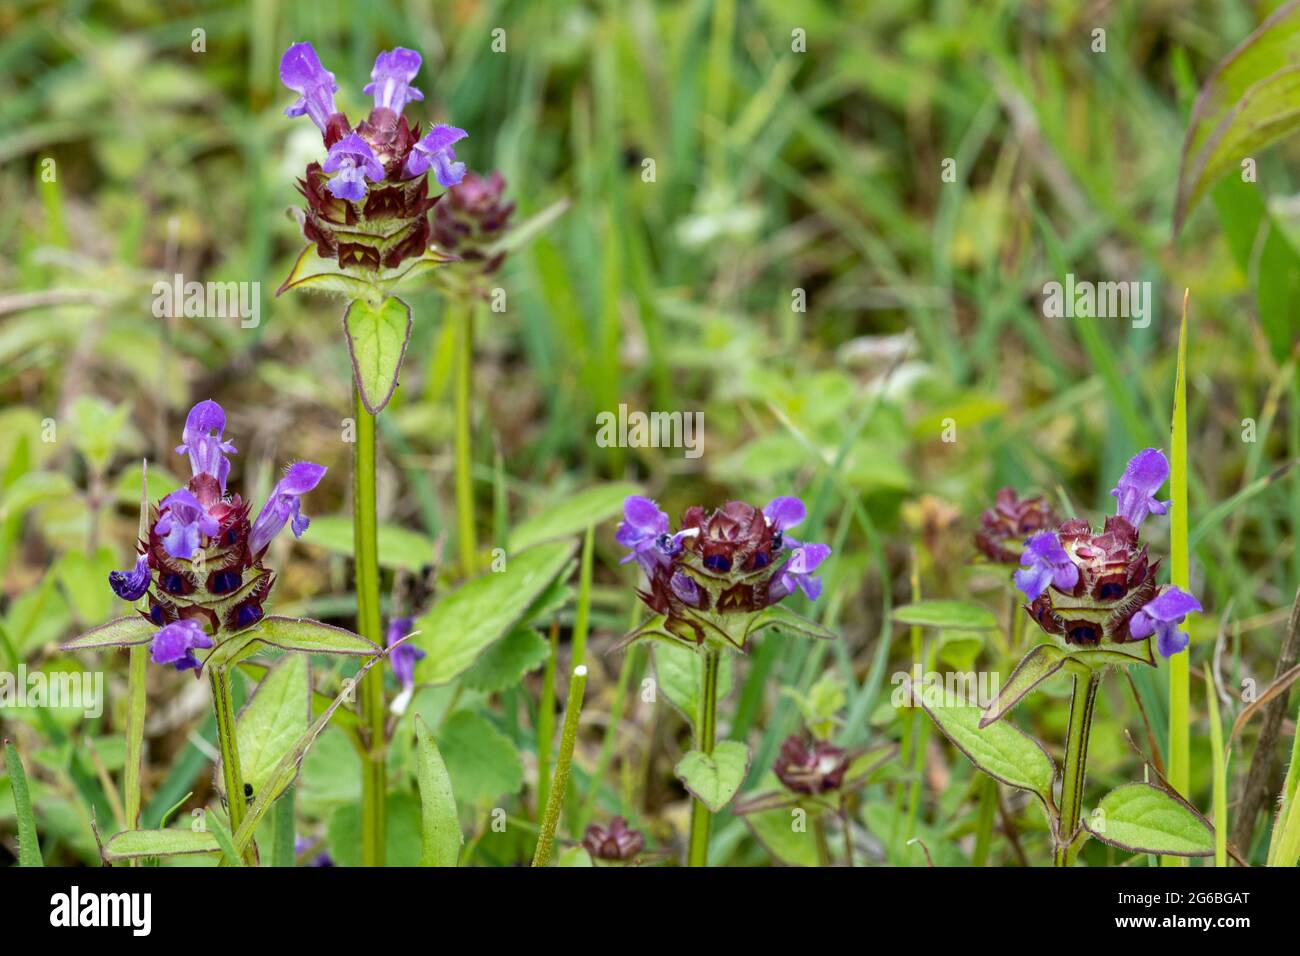 Common self-heal (Prunella vulgaris) wildflower, also called selfheal, heal-all, woundwort Stock Photo